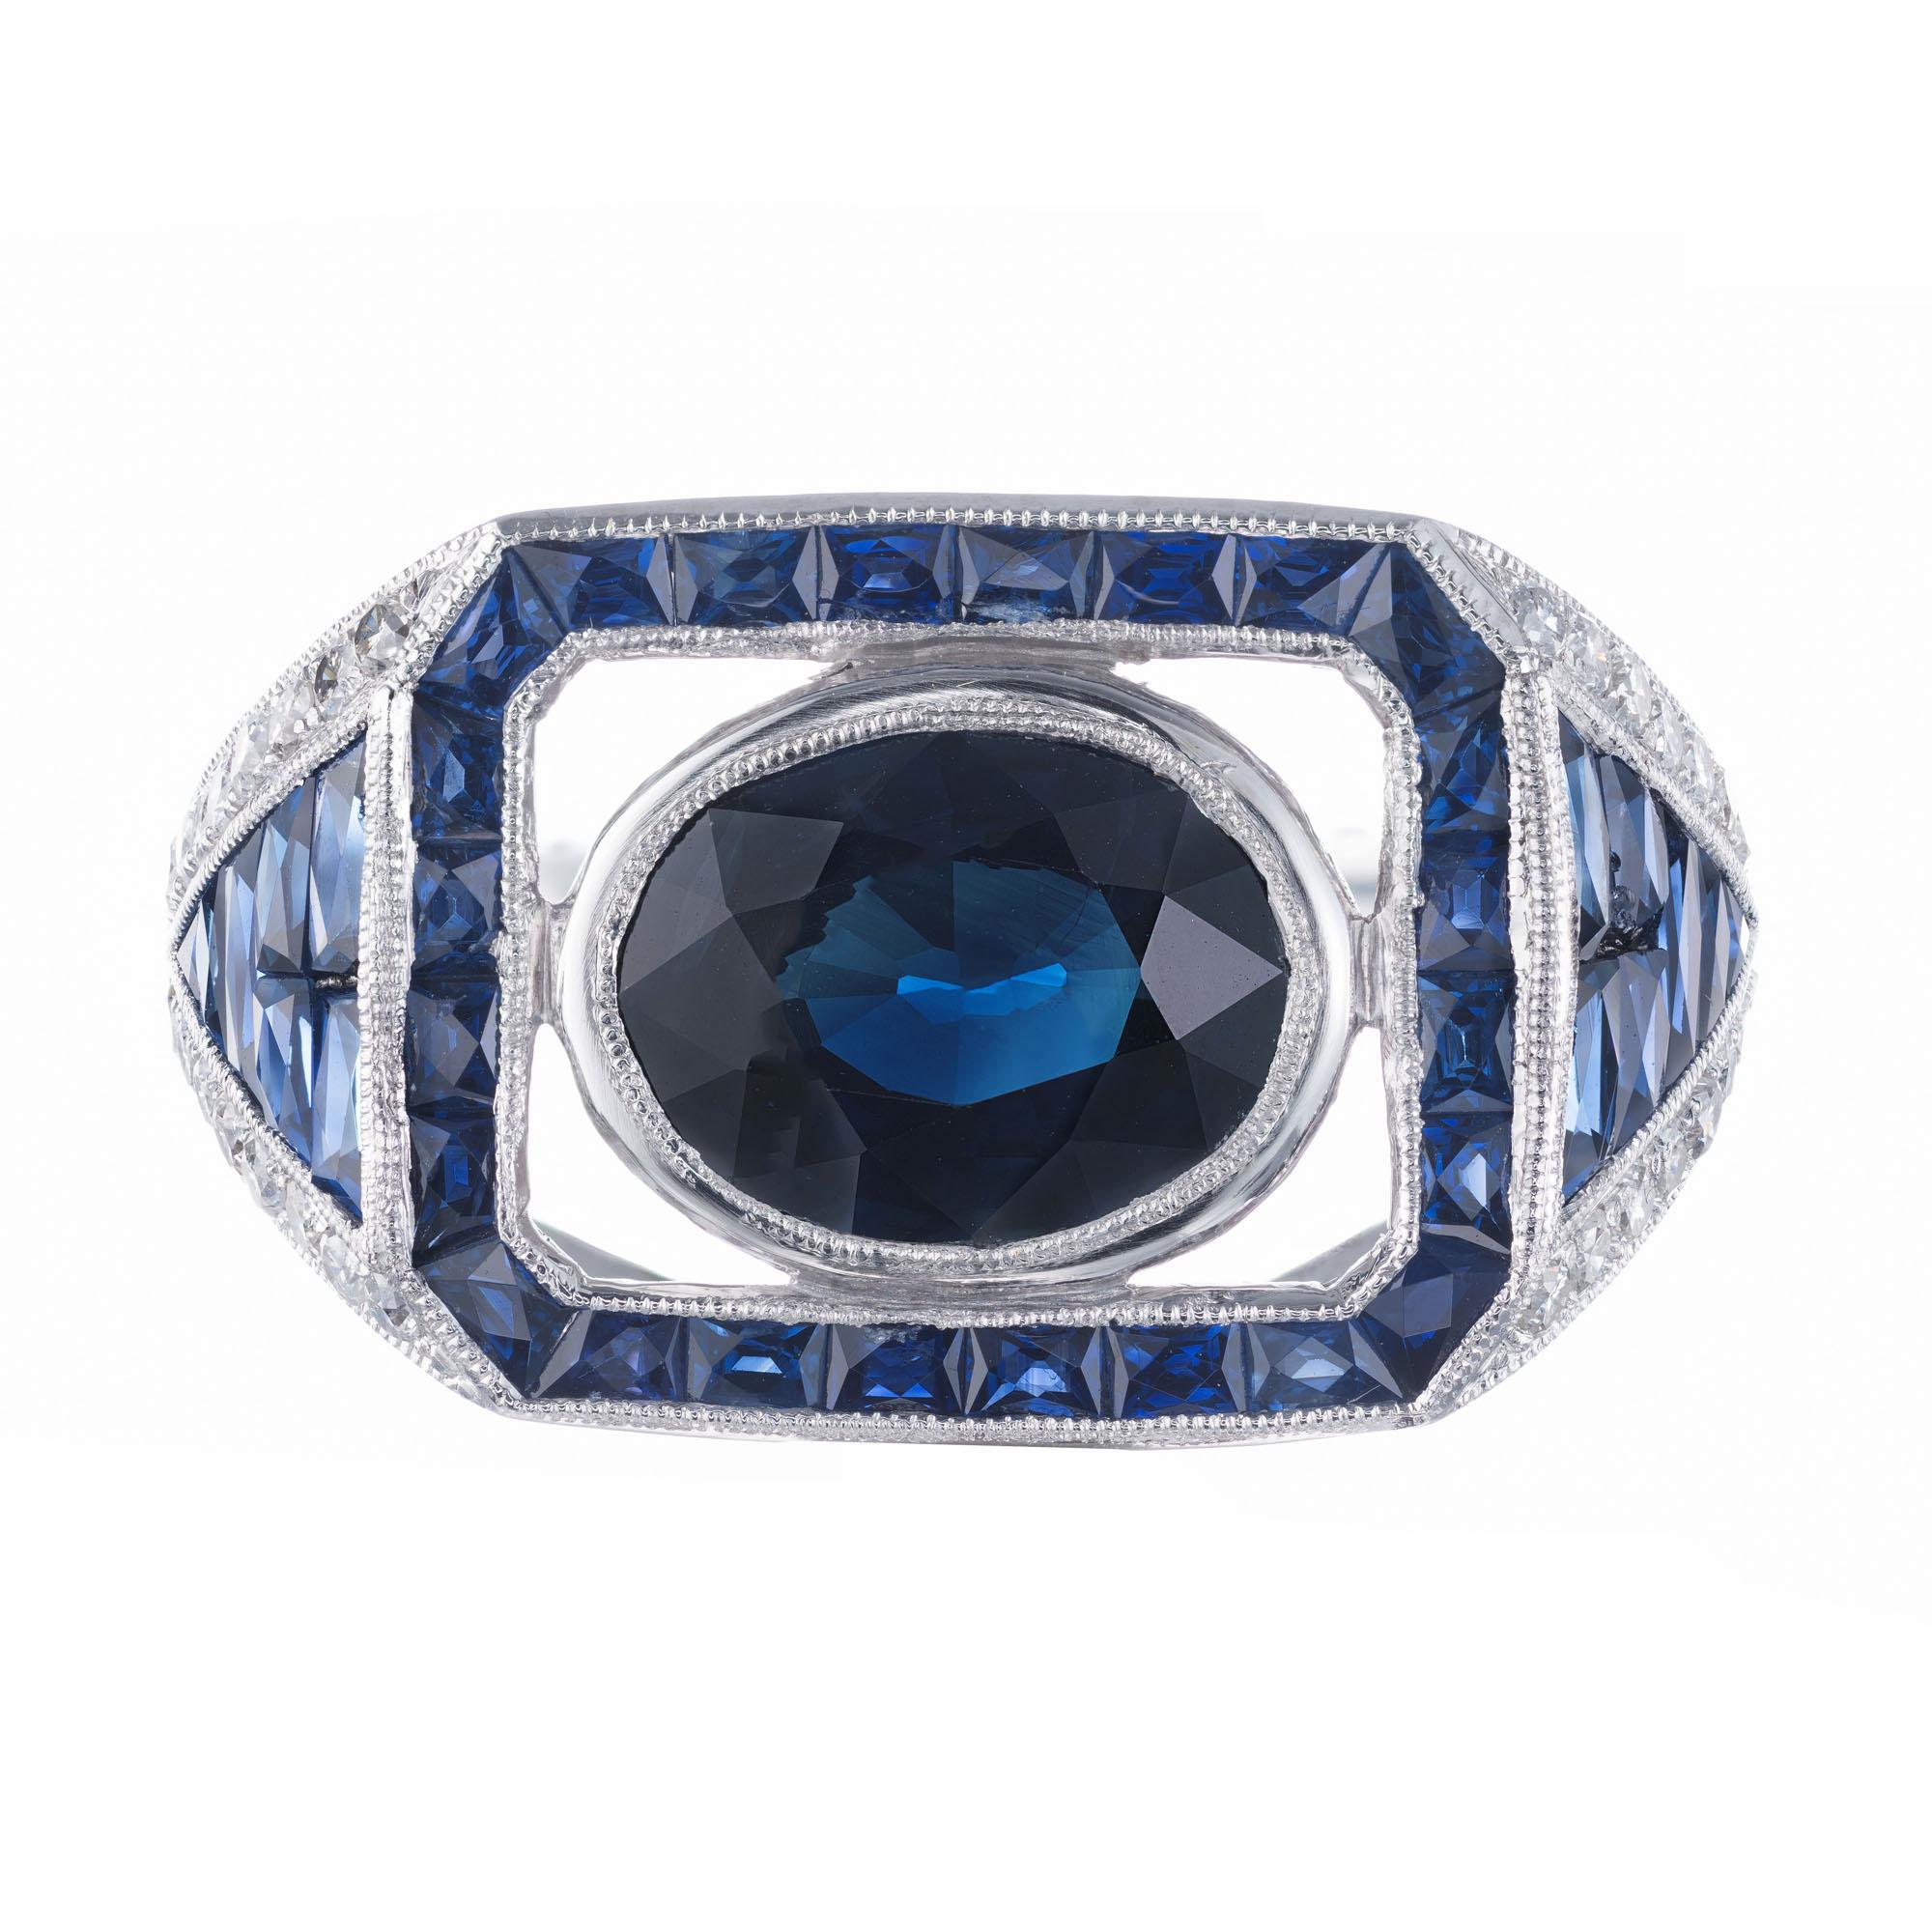 Sophia D sapphire and diamond ring. 2.80 carat natural GIA certified no heat oval center sapphire with a halo of round sapphires and French cut baguette sapphires and round brilliant cut diamonds, in a platinum setting. 

1 oval cut dark blue